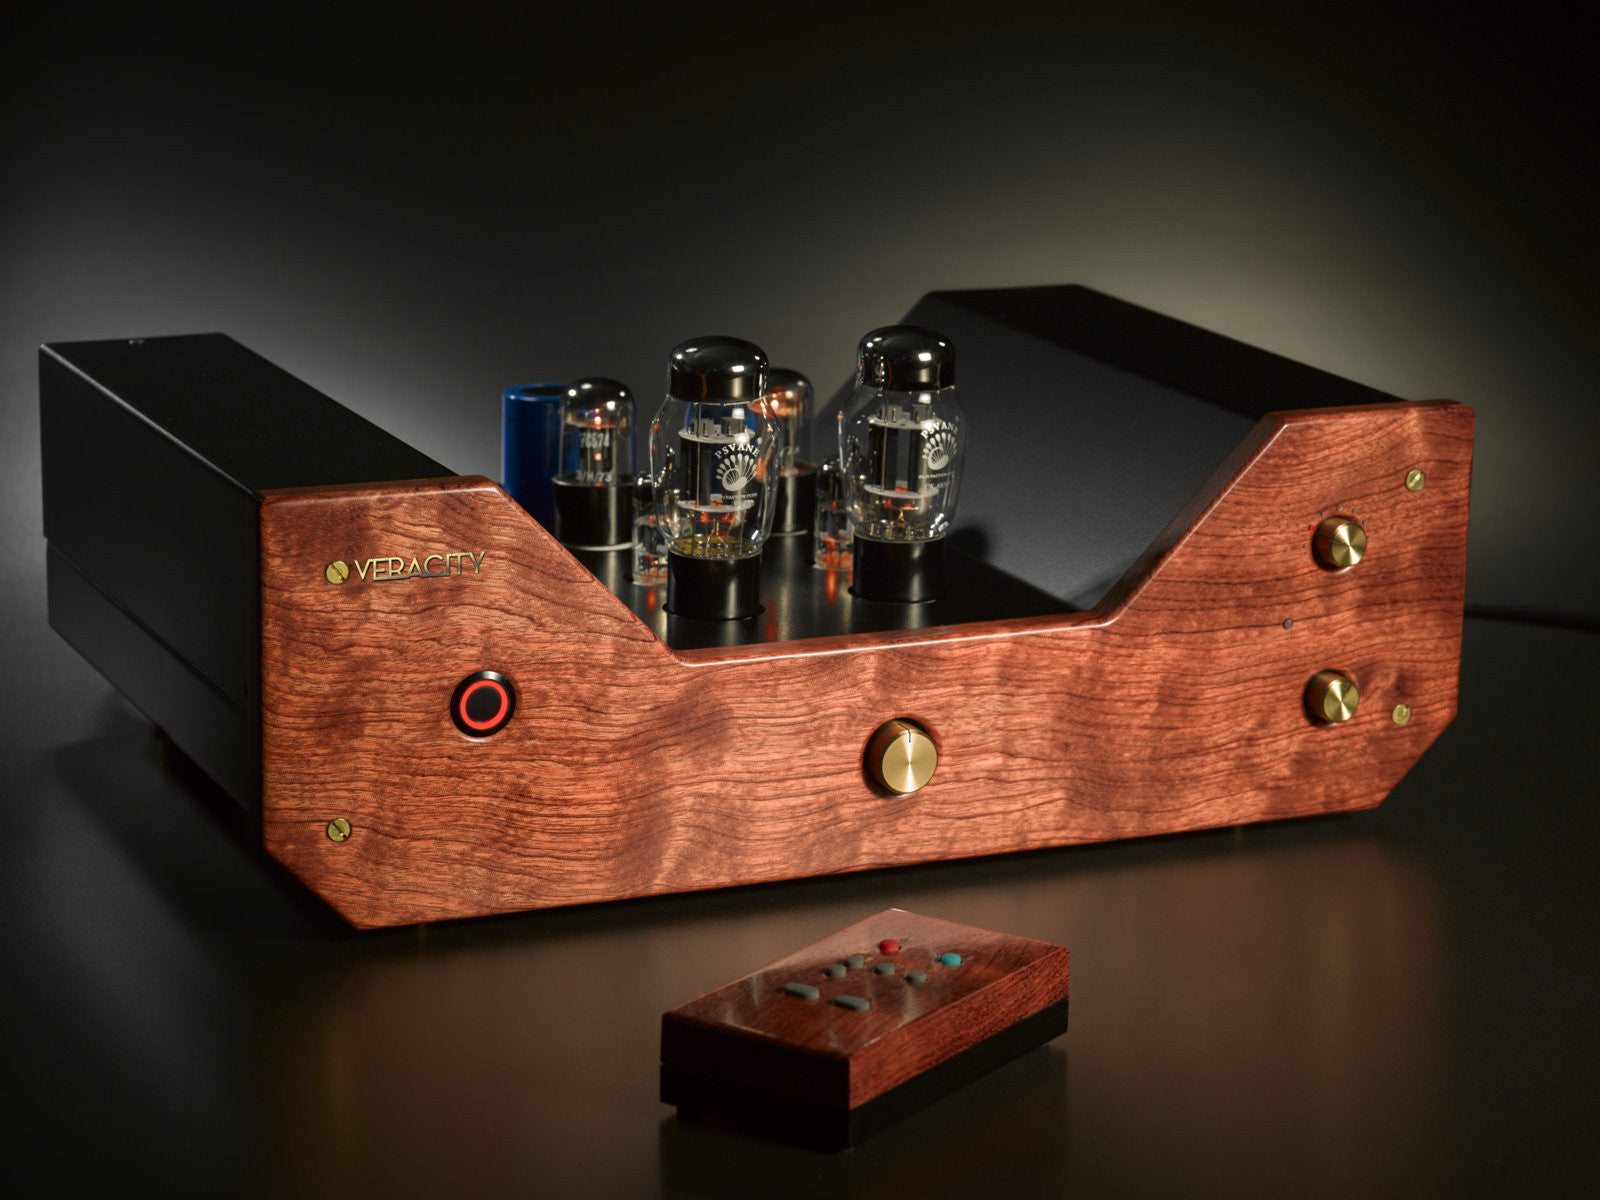 Veracity hand-built audio products